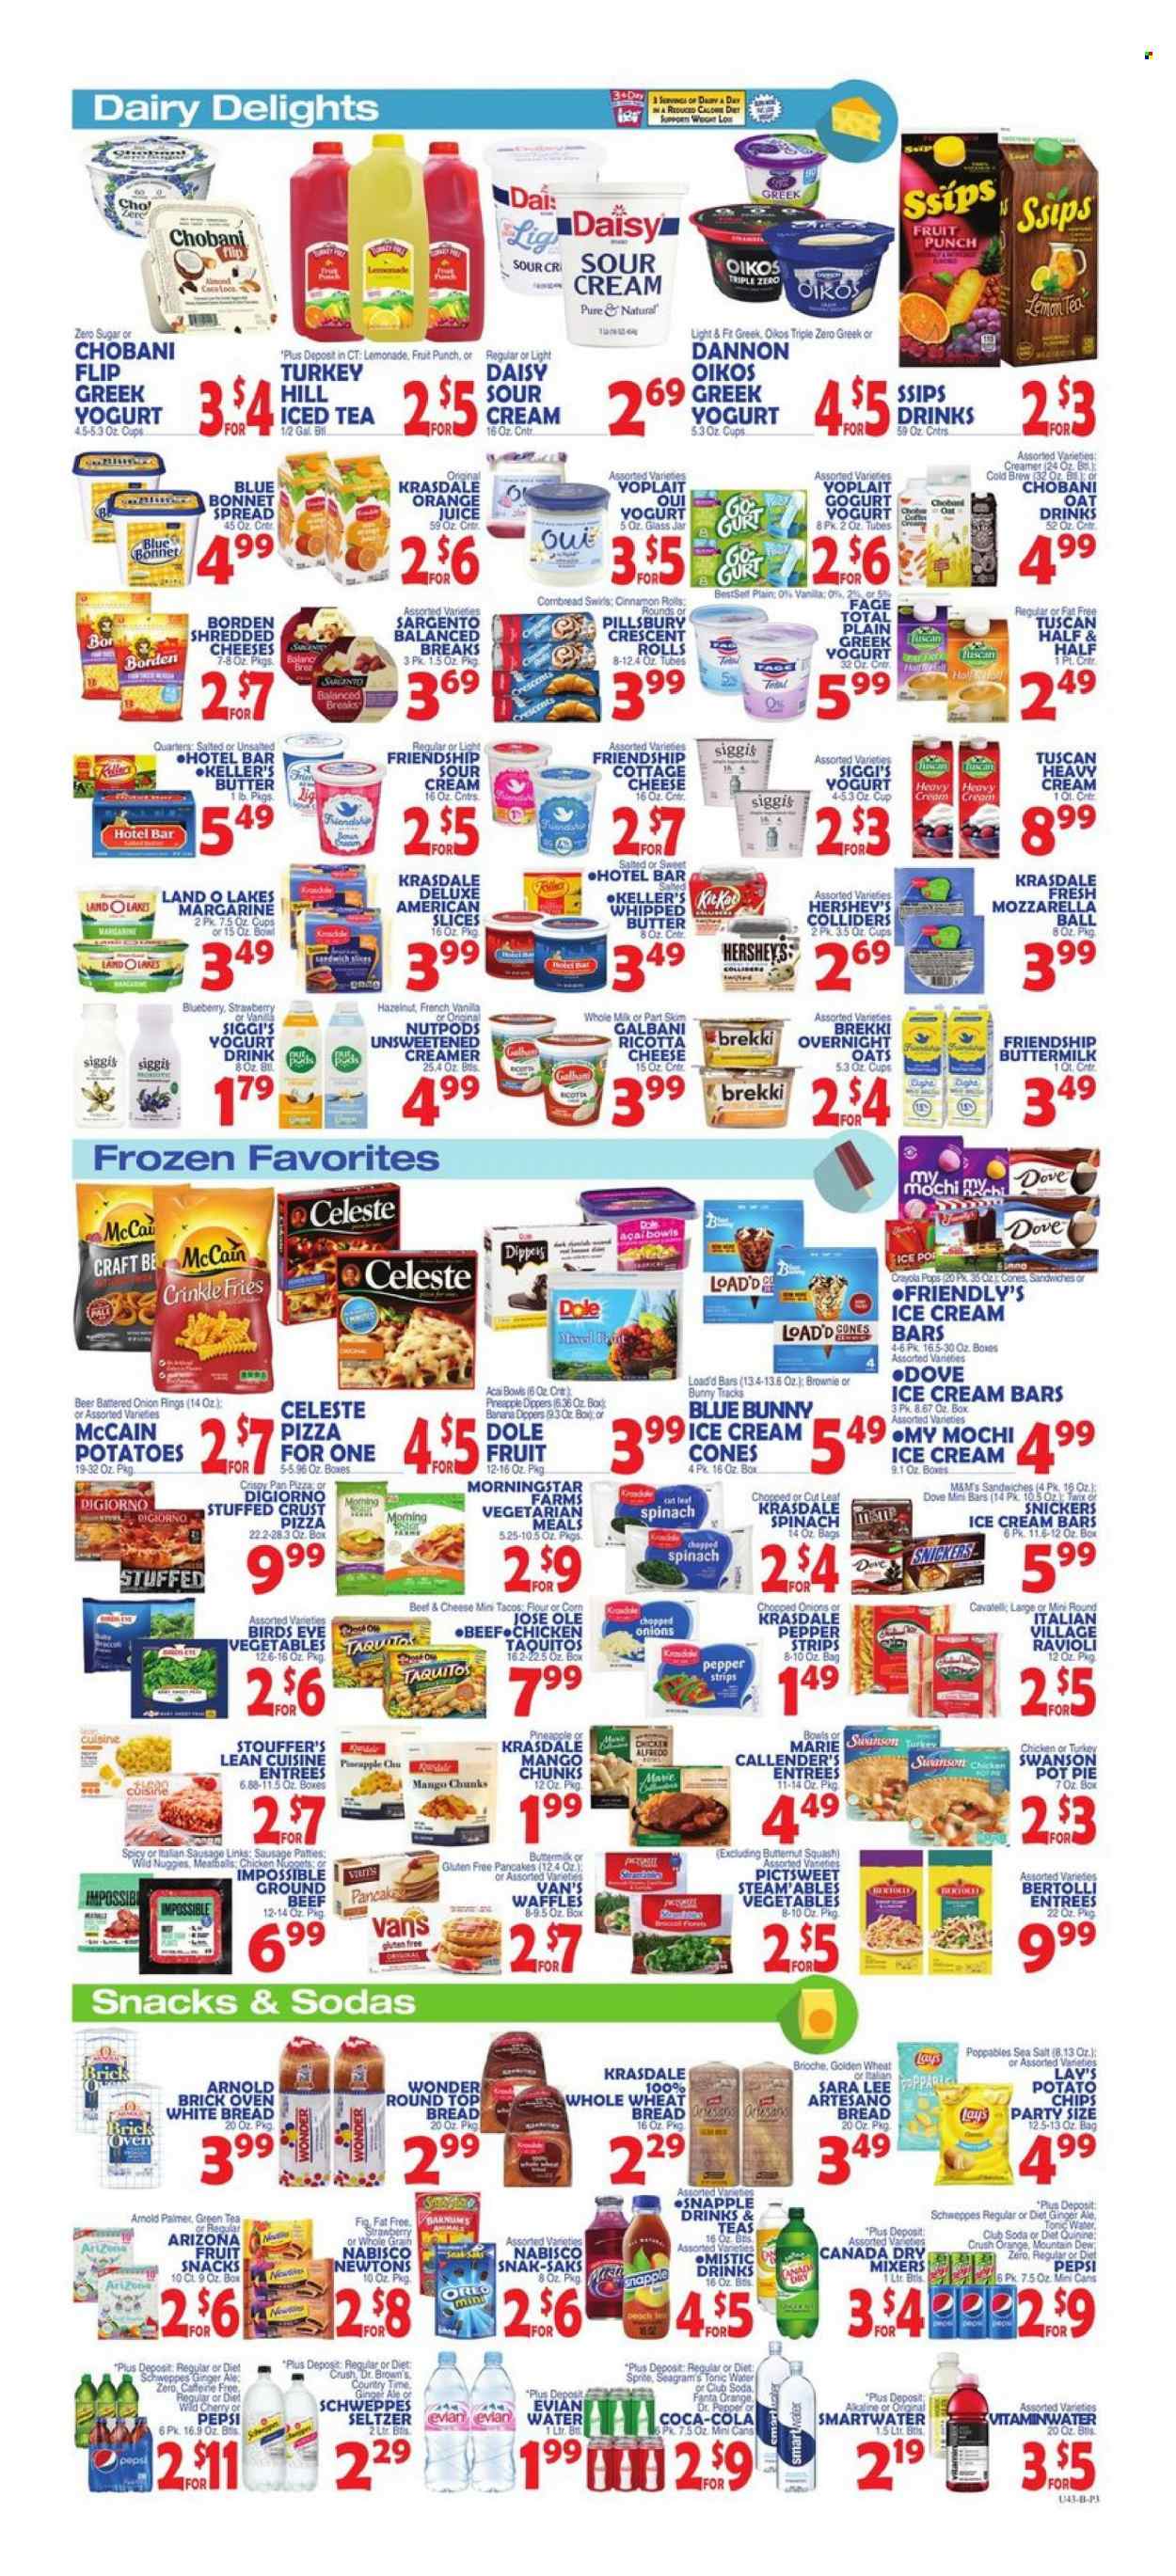 thumbnail - Bravo Supermarkets Flyer - 03/24/2023 - 03/30/2023 - Sales products - bread, white bread, pie, brioche, tacos, Sara Lee, cinnamon roll, crescent rolls, pot pie, brownies, waffles, butternut squash, Dole, cherries, ravioli, pizza, onion rings, meatballs, sandwich, nuggets, pancakes, Pillsbury, chicken nuggets, Bird's Eye, MorningStar Farms, Lean Cuisine, taquitos, Bertolli, sausage, italian sausage, cottage cheese, ricotta, sandwich slices, Galbani, Sargento, greek yoghurt, Oreo, yoghurt, Oikos, Yoplait, Chobani, Dannon, buttermilk, yoghurt drink, margarine, whipped butter, sour cream, creamer, heavy cream, ice cream, ice cream bars, Hershey's, Friendly's Ice Cream, Blue Bunny, strips, Stouffer's, McCain, potato fries, crinkle fries, Celeste, Dove, Snickers, KitKat, M&M's, fruit snack, potato chips, Lay’s, Canada Dry, Coca-Cola, ginger ale, lemonade, Mountain Dew, Schweppes, Sprite, Pepsi, orange juice, juice, Fanta, ice tea, Dr. Pepper, tonic, Diet Pepsi, AriZona, Snapple, Dr. Brown's, Country Time, fruit punch, Club Soda, seltzer water, Smartwater, Evian, green tea, red wine, wine, beef meat, ground beef, Half and half. Page 3.